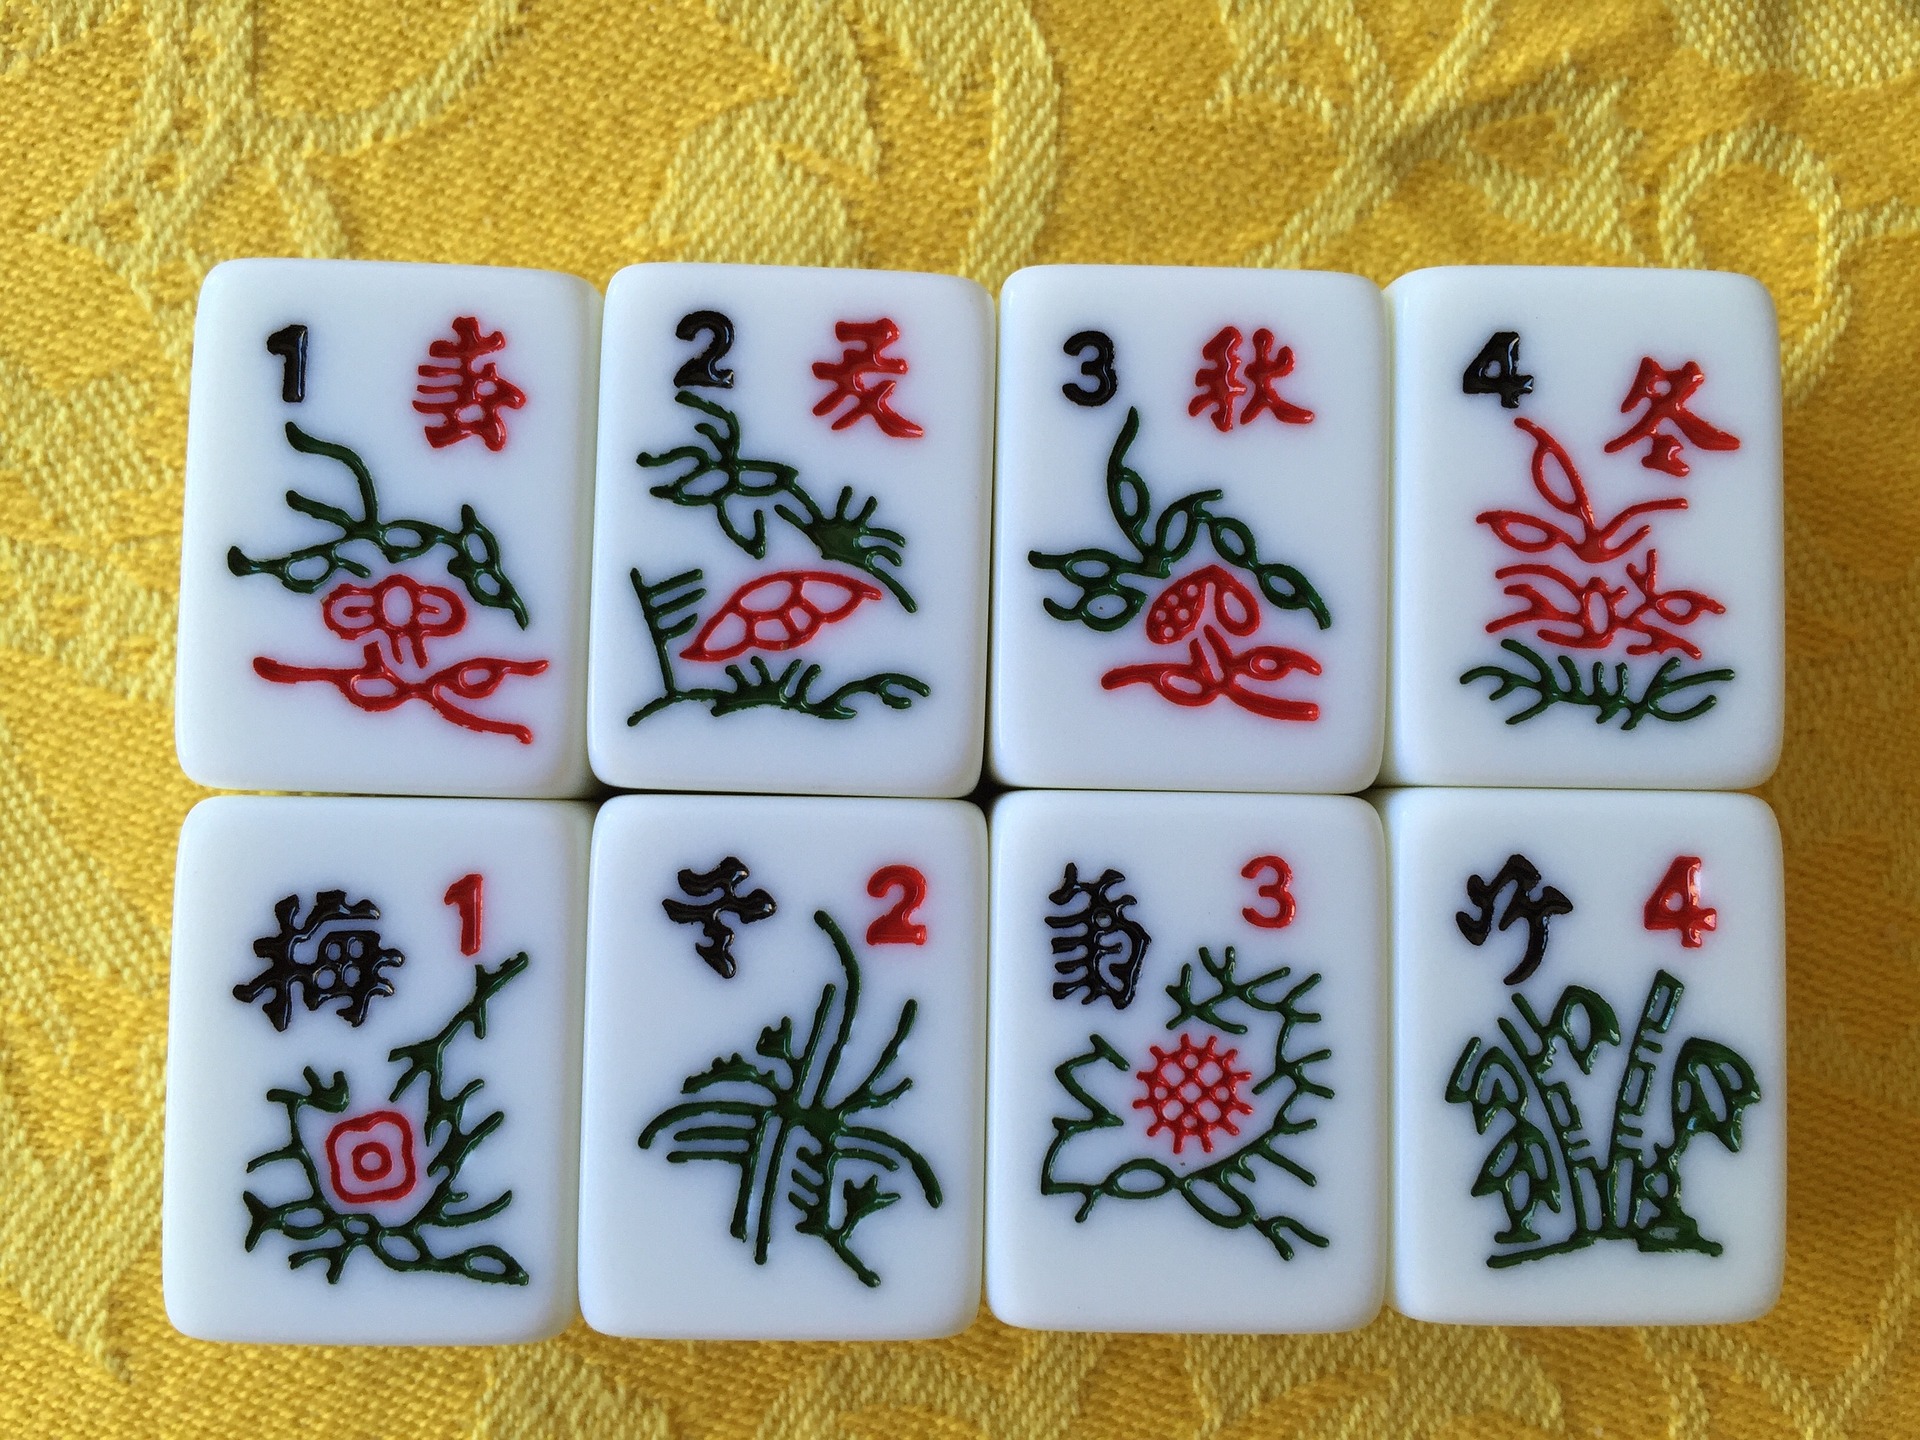 More than a game: Mastering Mahjong with AI and machine learning